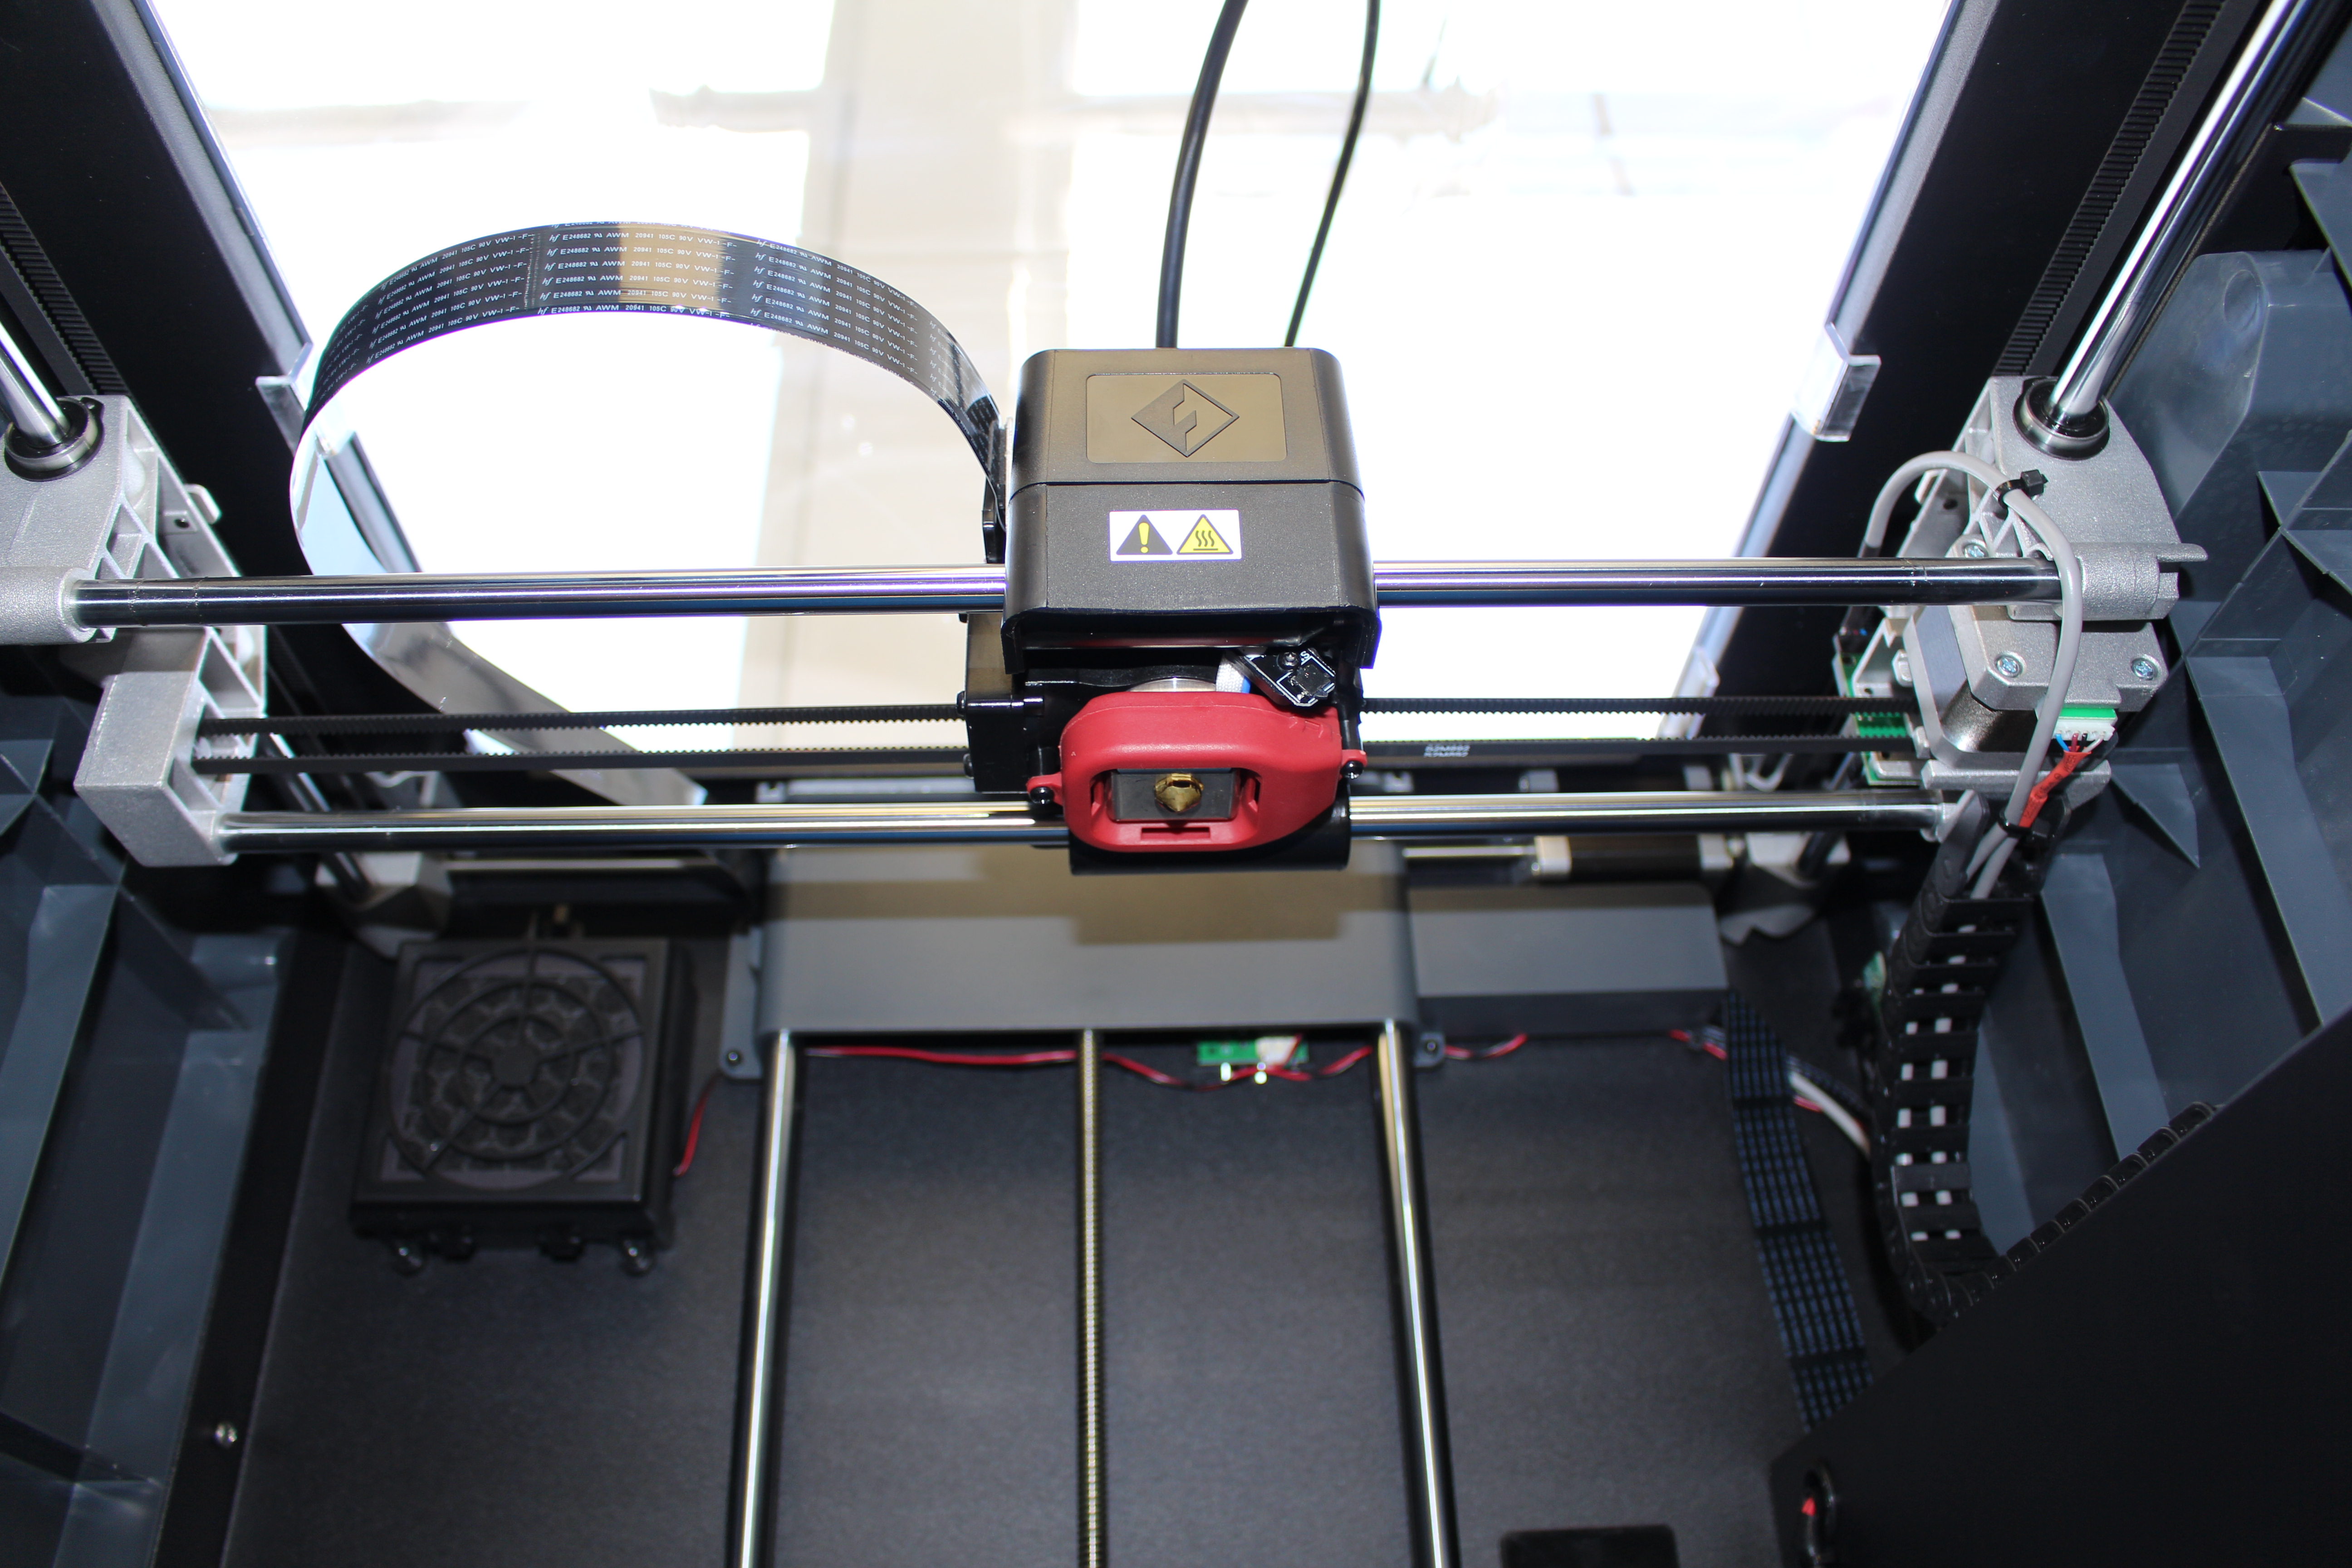 The extruder of the FlashForge Guider IIS. Photo by 3D Printing Industry.